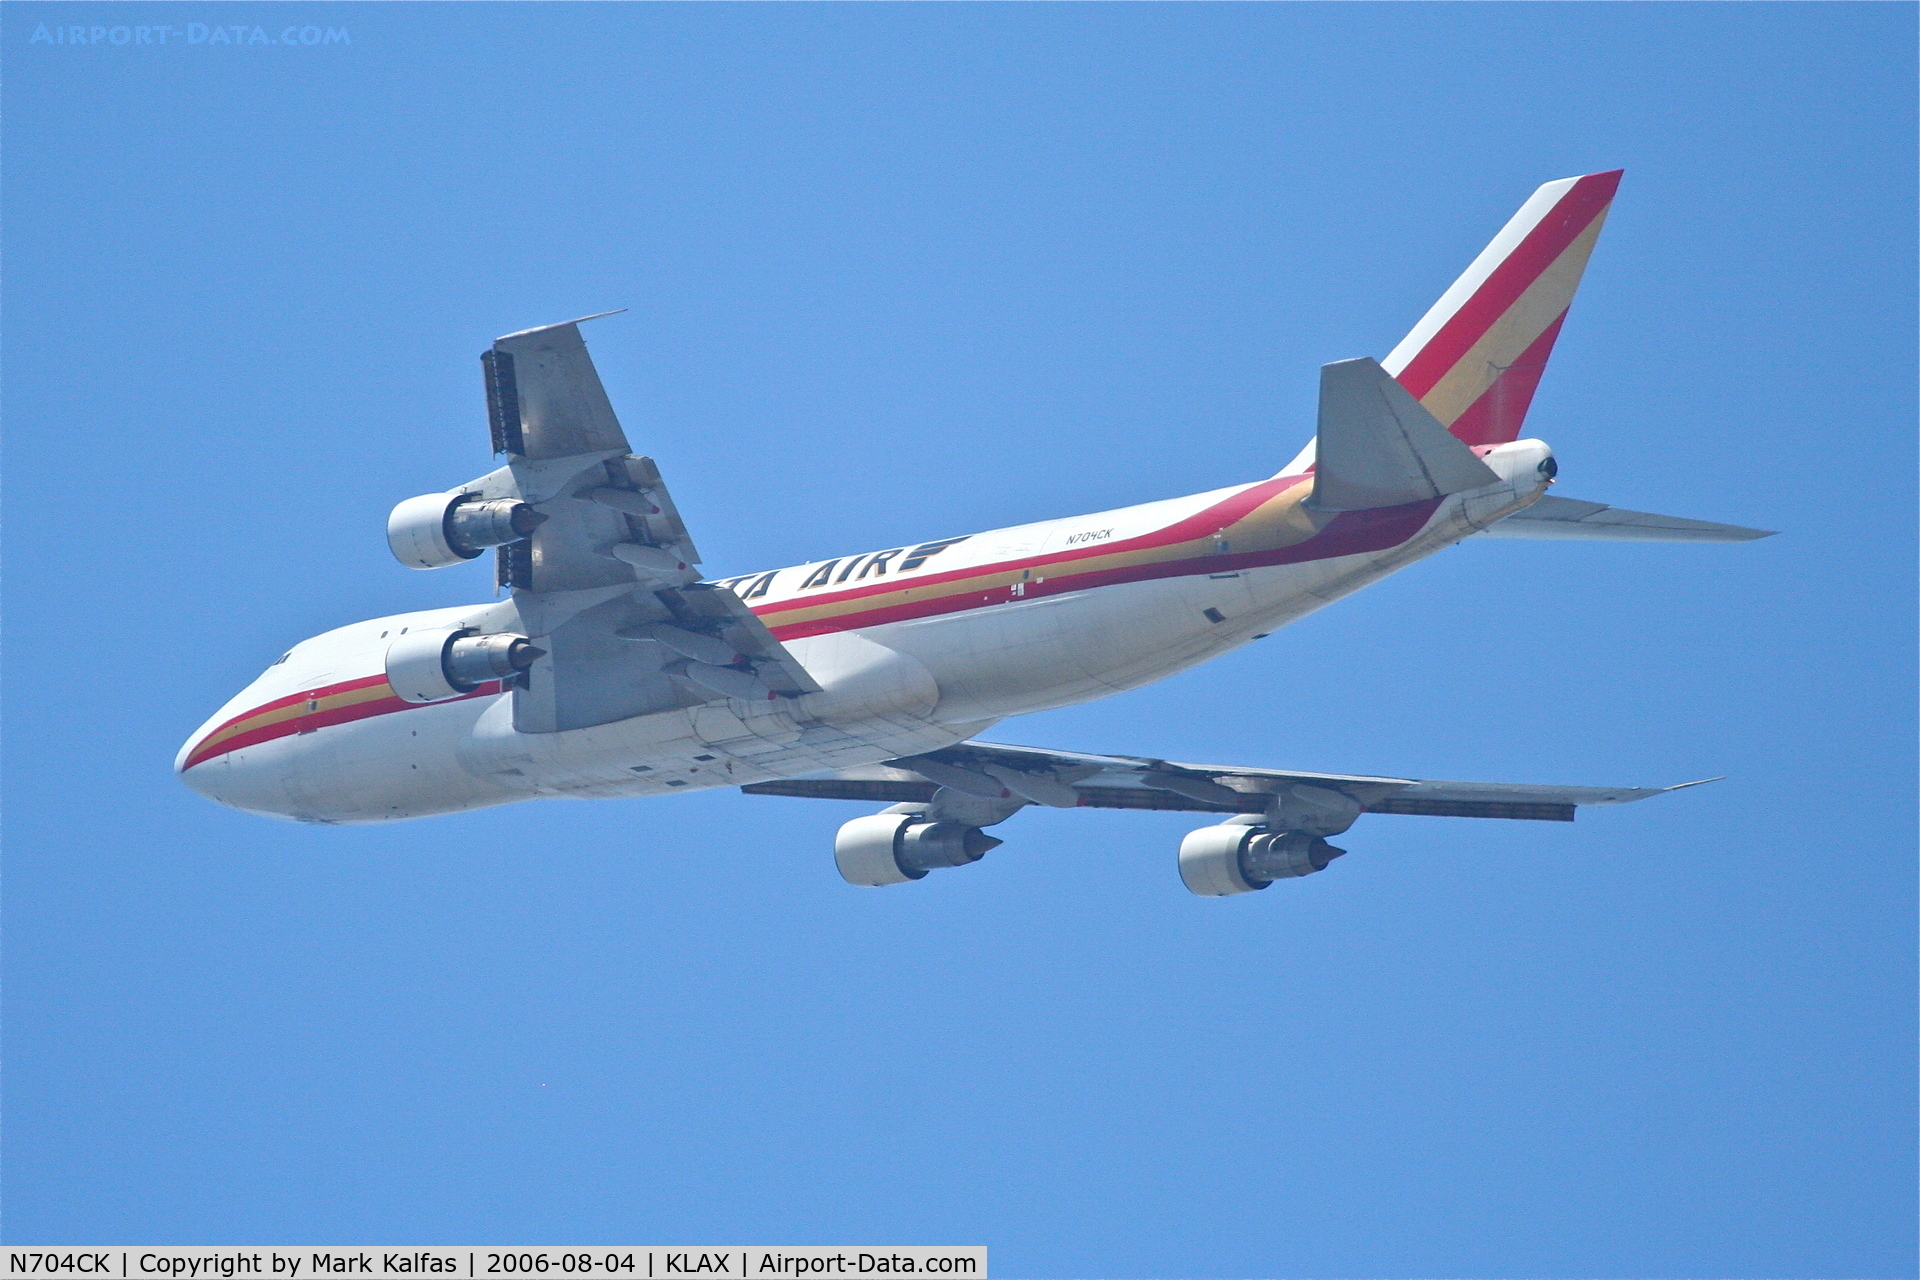 N704CK, 1980 Boeing 747-209F C/N 22299, KALITTA AIR B742, N704CK departing 25L KLAX.
This aircraft crashed 25 May 2008 at BRU after aborted take-off